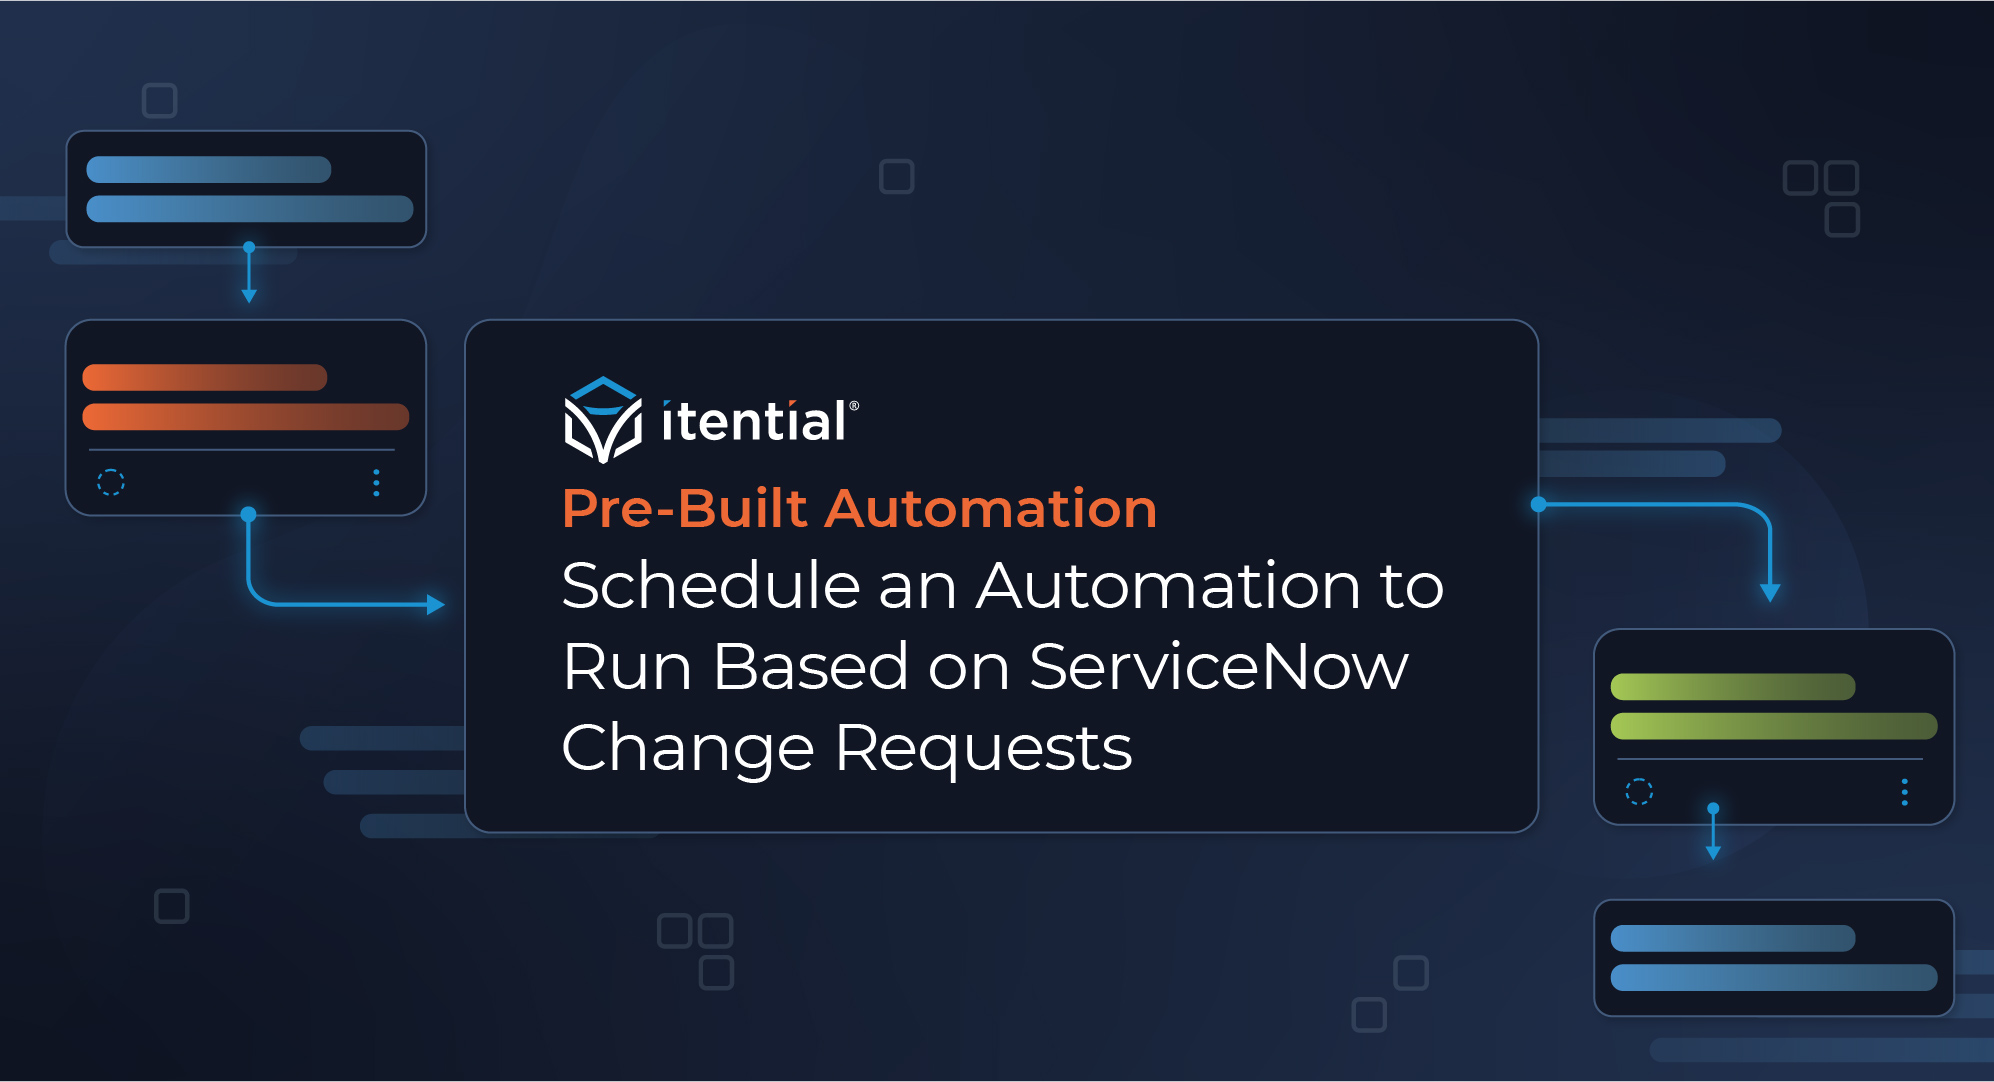 Schedule an Automation to Run Based on ServiceNow Change Requests